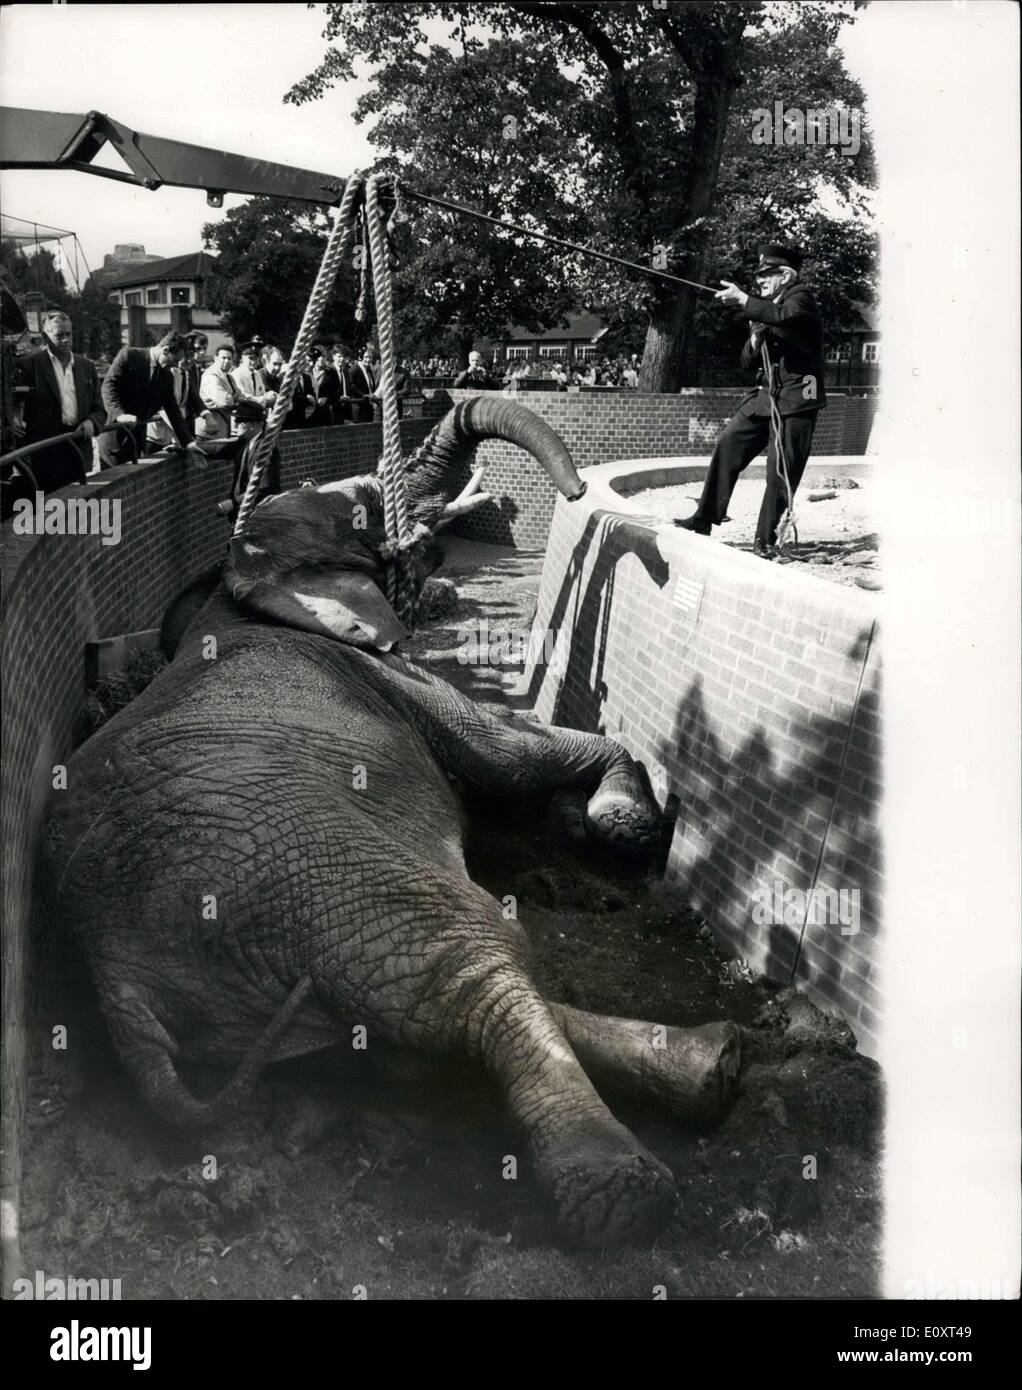 Sep. 07, 1967 - 7-9-67 Elephant dies at London Zoo. The African elephant, called Diksie, died yesterday at the London Zoo. She had been catching food thrown by spectators when another elephant tried to bump it out of the way. Diksie fell 5ft into the trench built in front of the elephant compound and could not get to its feet. It tried, but Diksie, aged 27, and the oldest of the Zoo's four elephants was helpless. Not even the Zoo's crane could lift the elephant. Diksie nearly pulled it over. A stronger crane was brought, but it was too late. Diksie died before she could be rescued Stock Photo